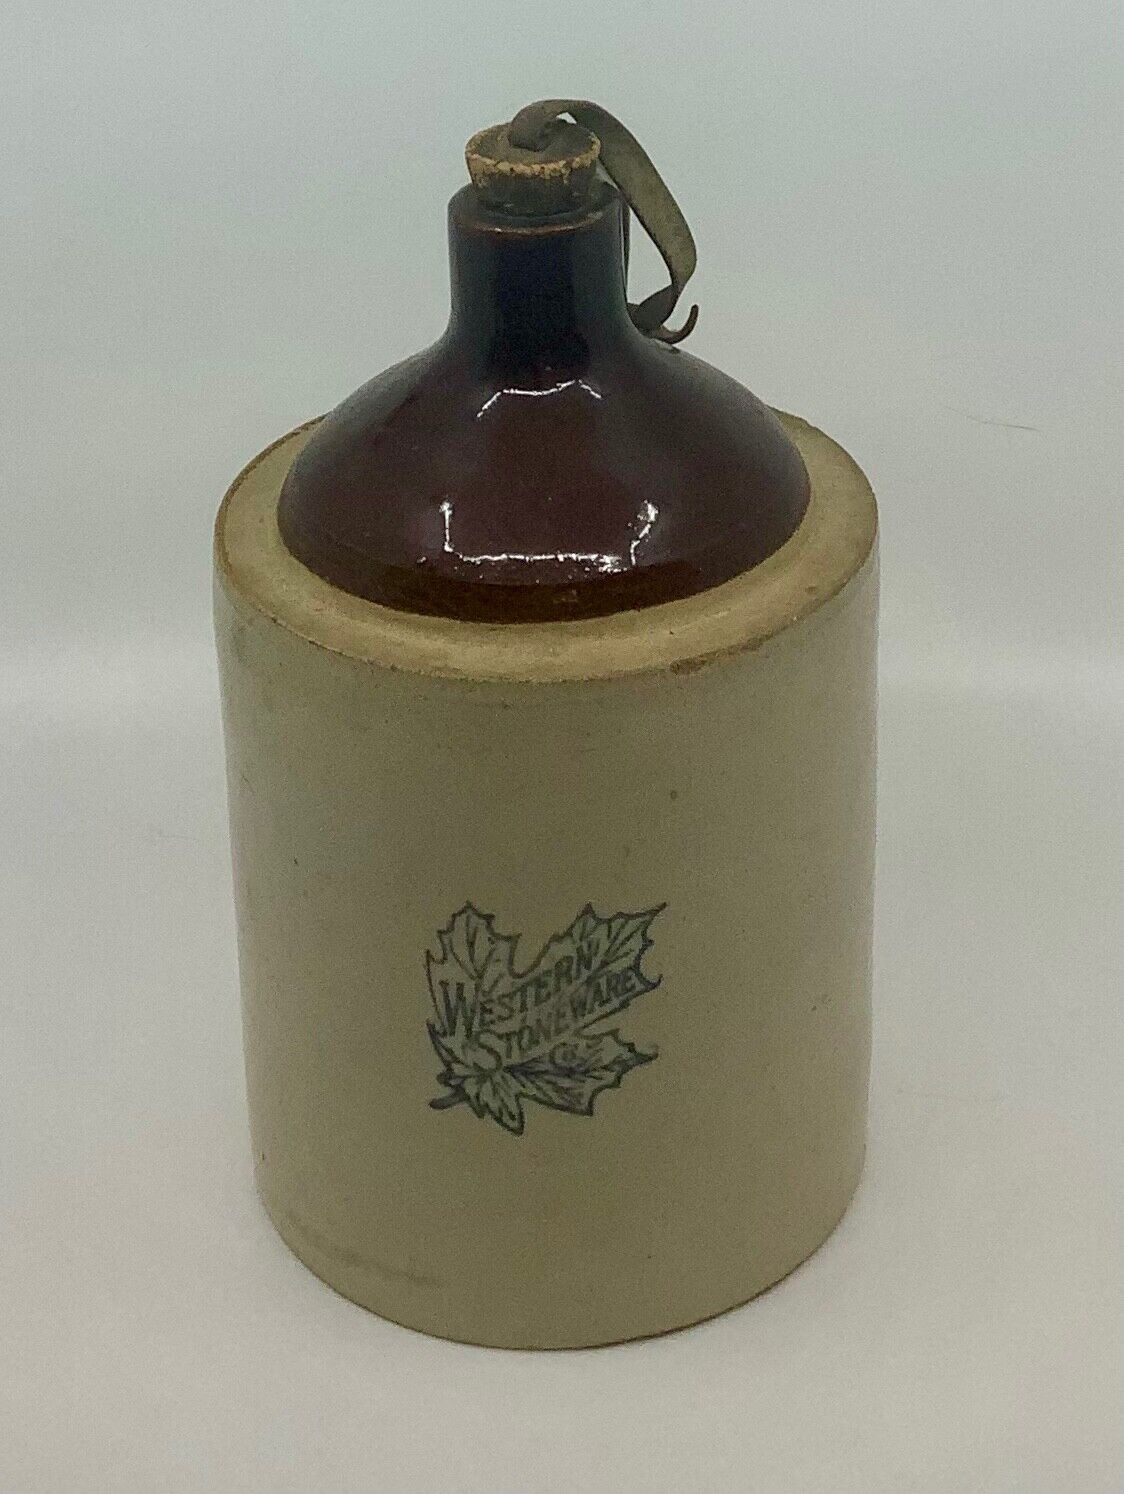 Rare Find: Authentic Vintage Western Stoneware Moonshine Jug - Buy Today